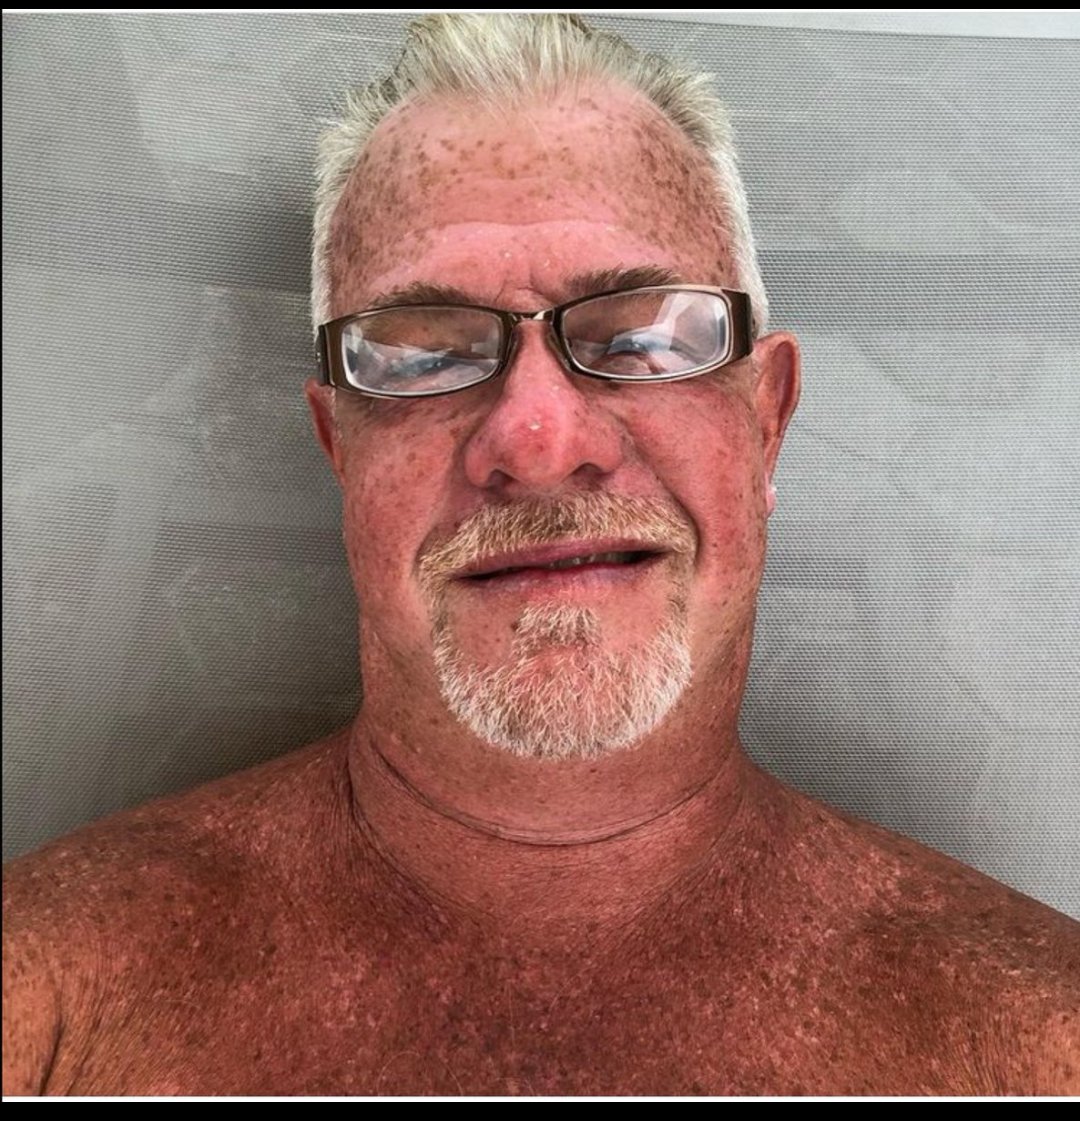 Jack Rust. Honestly wtf is this. His chest looks like roasted beef. Jack Krust. Just blue light toxicity lmao. You can see Asians that hide from the sun with perfect smooth no spot skin. U want some vitamin D though, but compare the extremes. White skin always been aristocratic